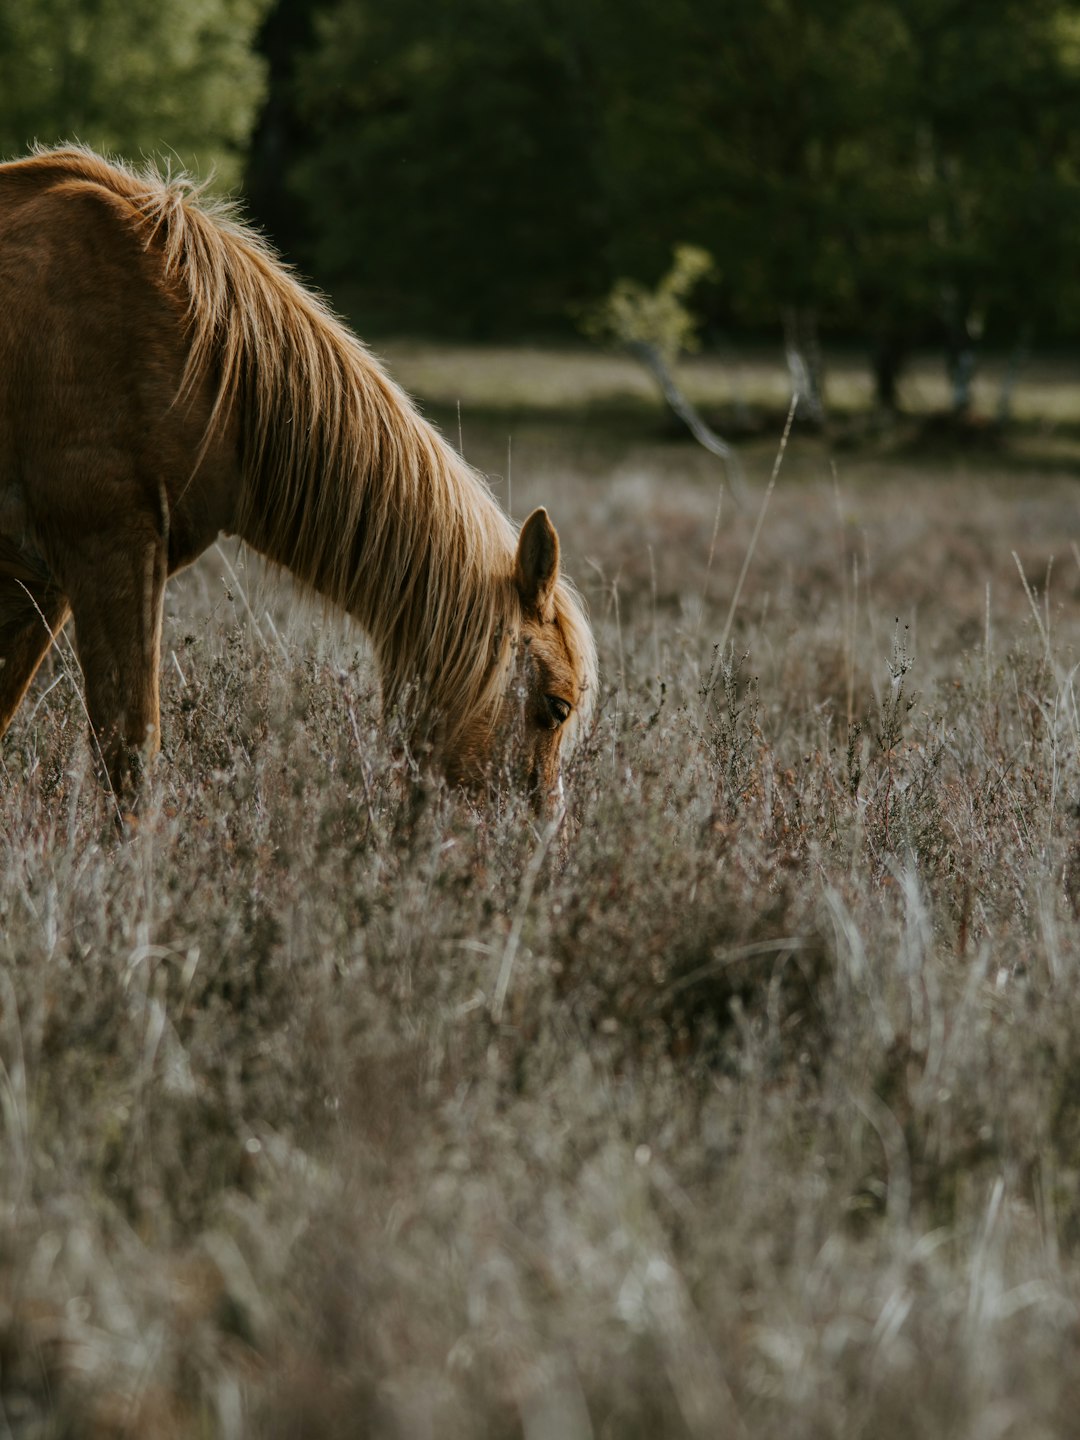 brown horse grazing on grass at the field